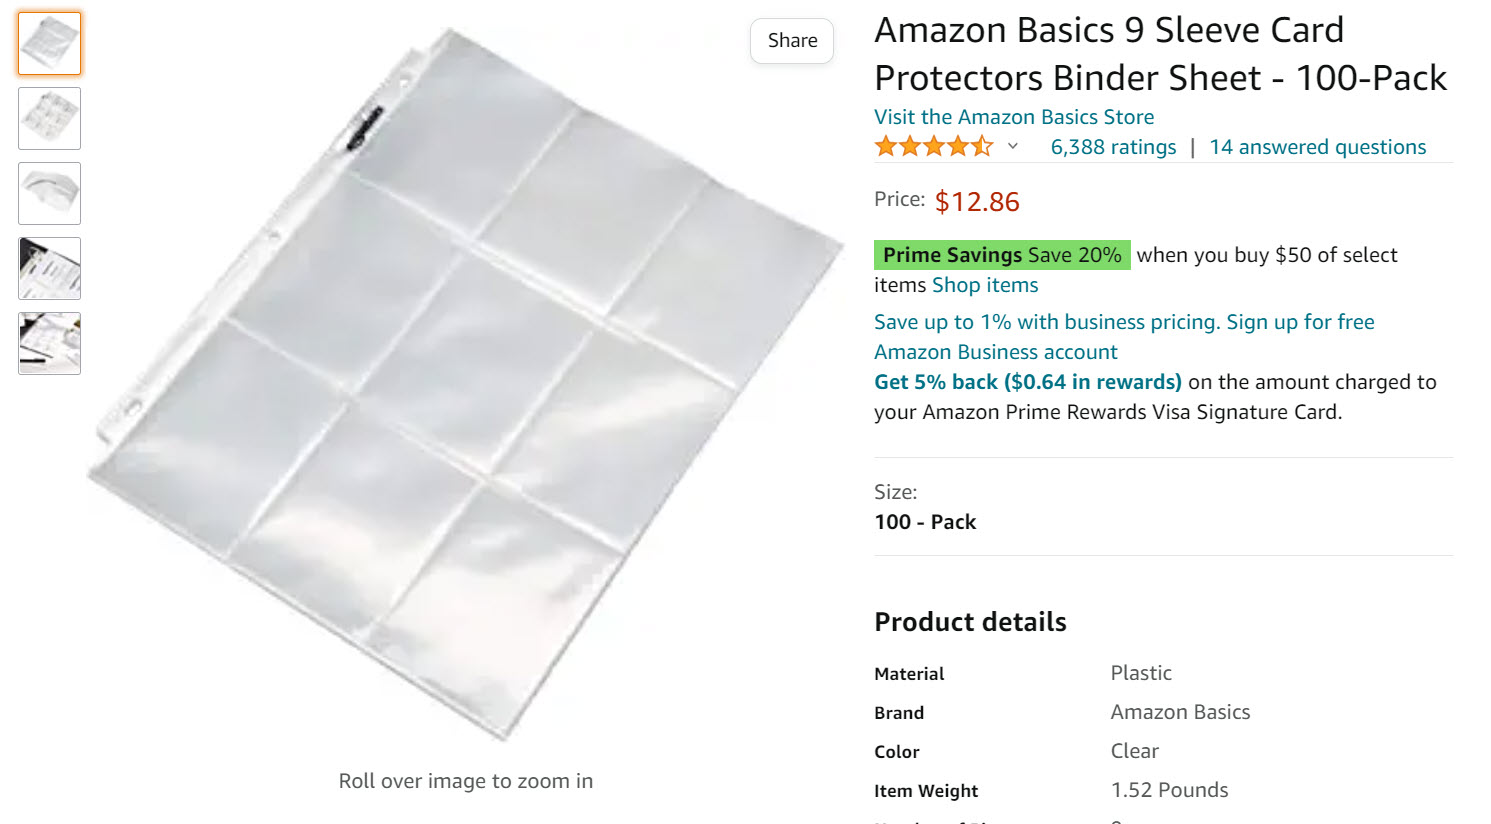 Includes OFFICE PRODUCTS I use to organize my genealogy research - including acid-free photo holders for binders! https://amzn.to/3UODlr6